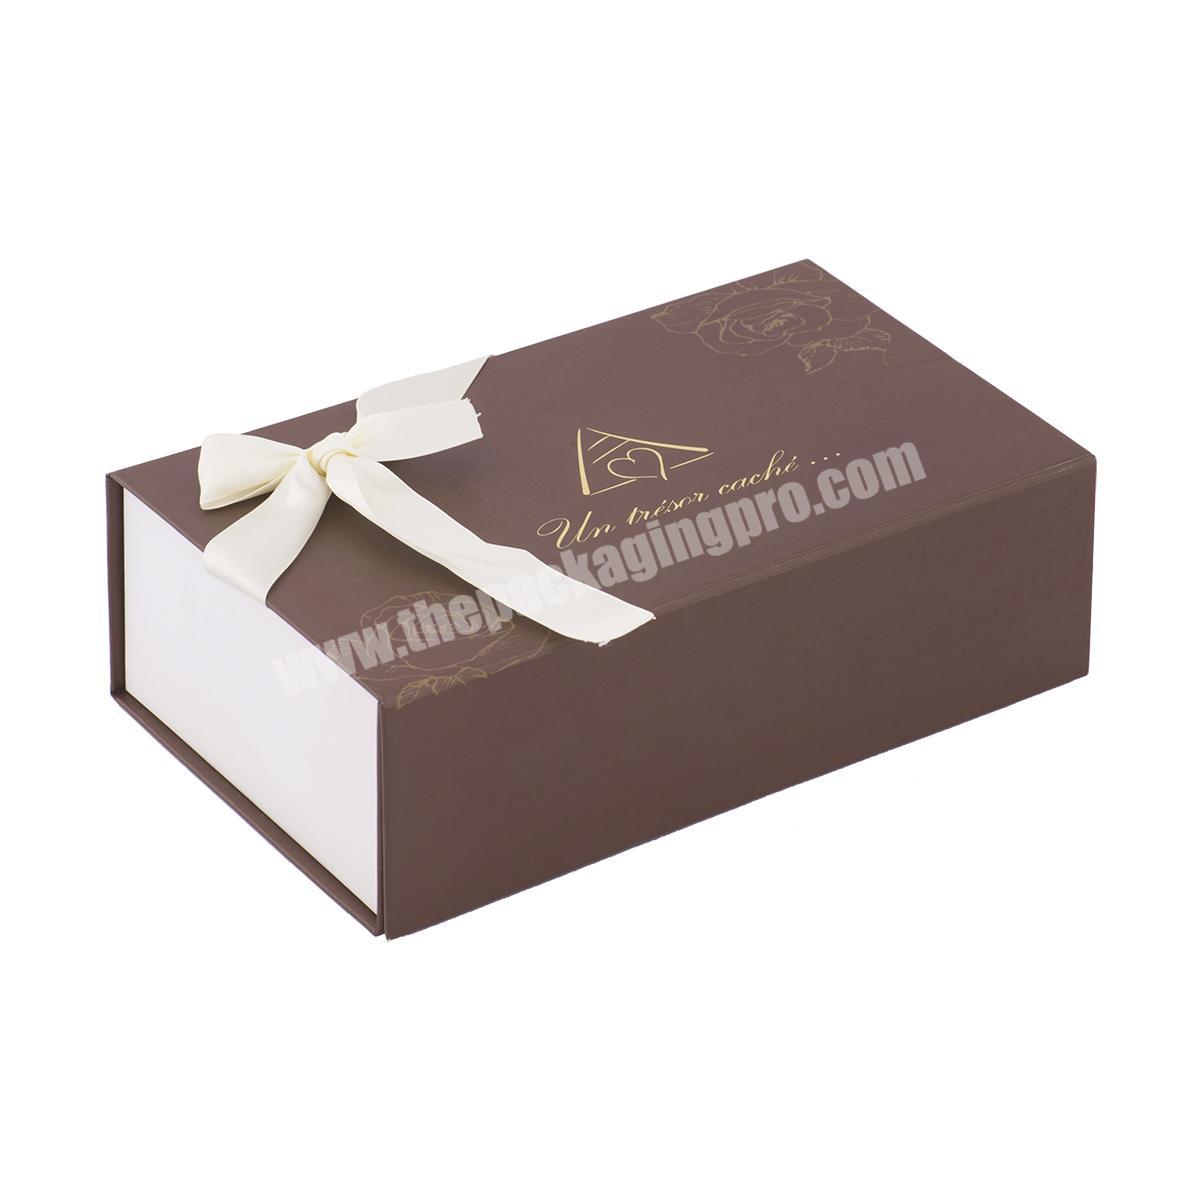 Hot new products wedding gift box